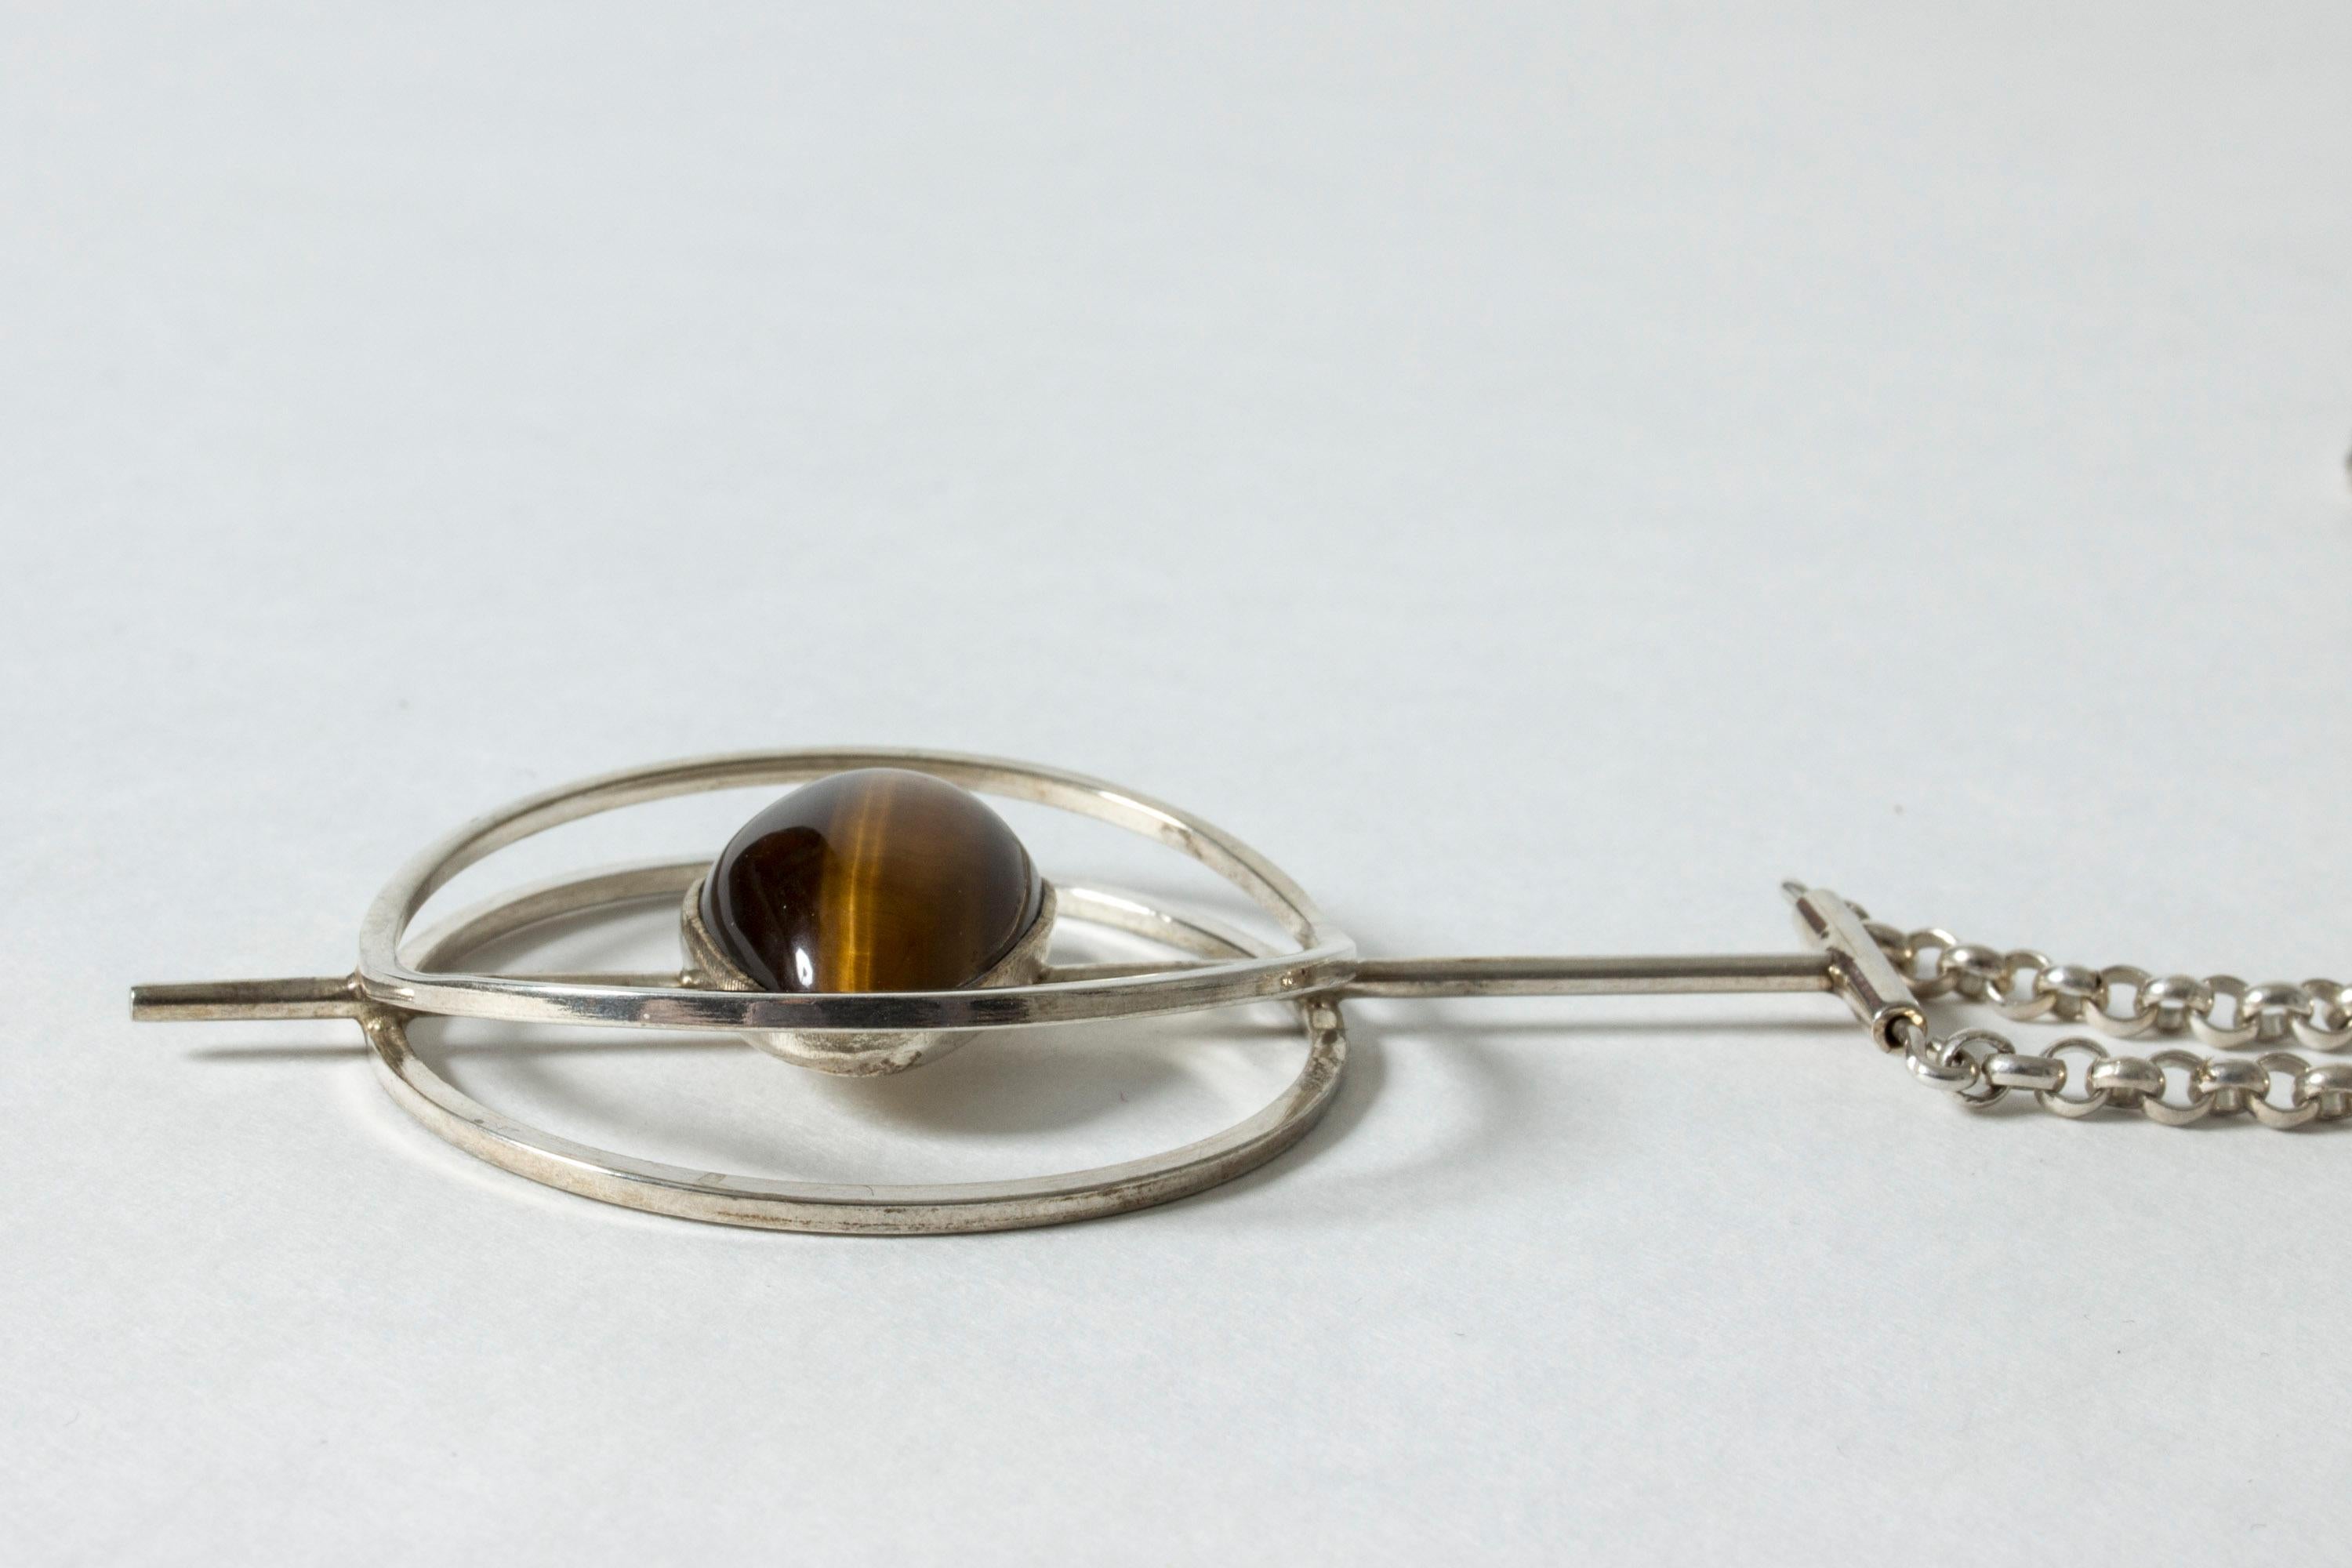 Oval Cut Silver and Tigereye Pendant from Kaplans, Sweden, 1960s